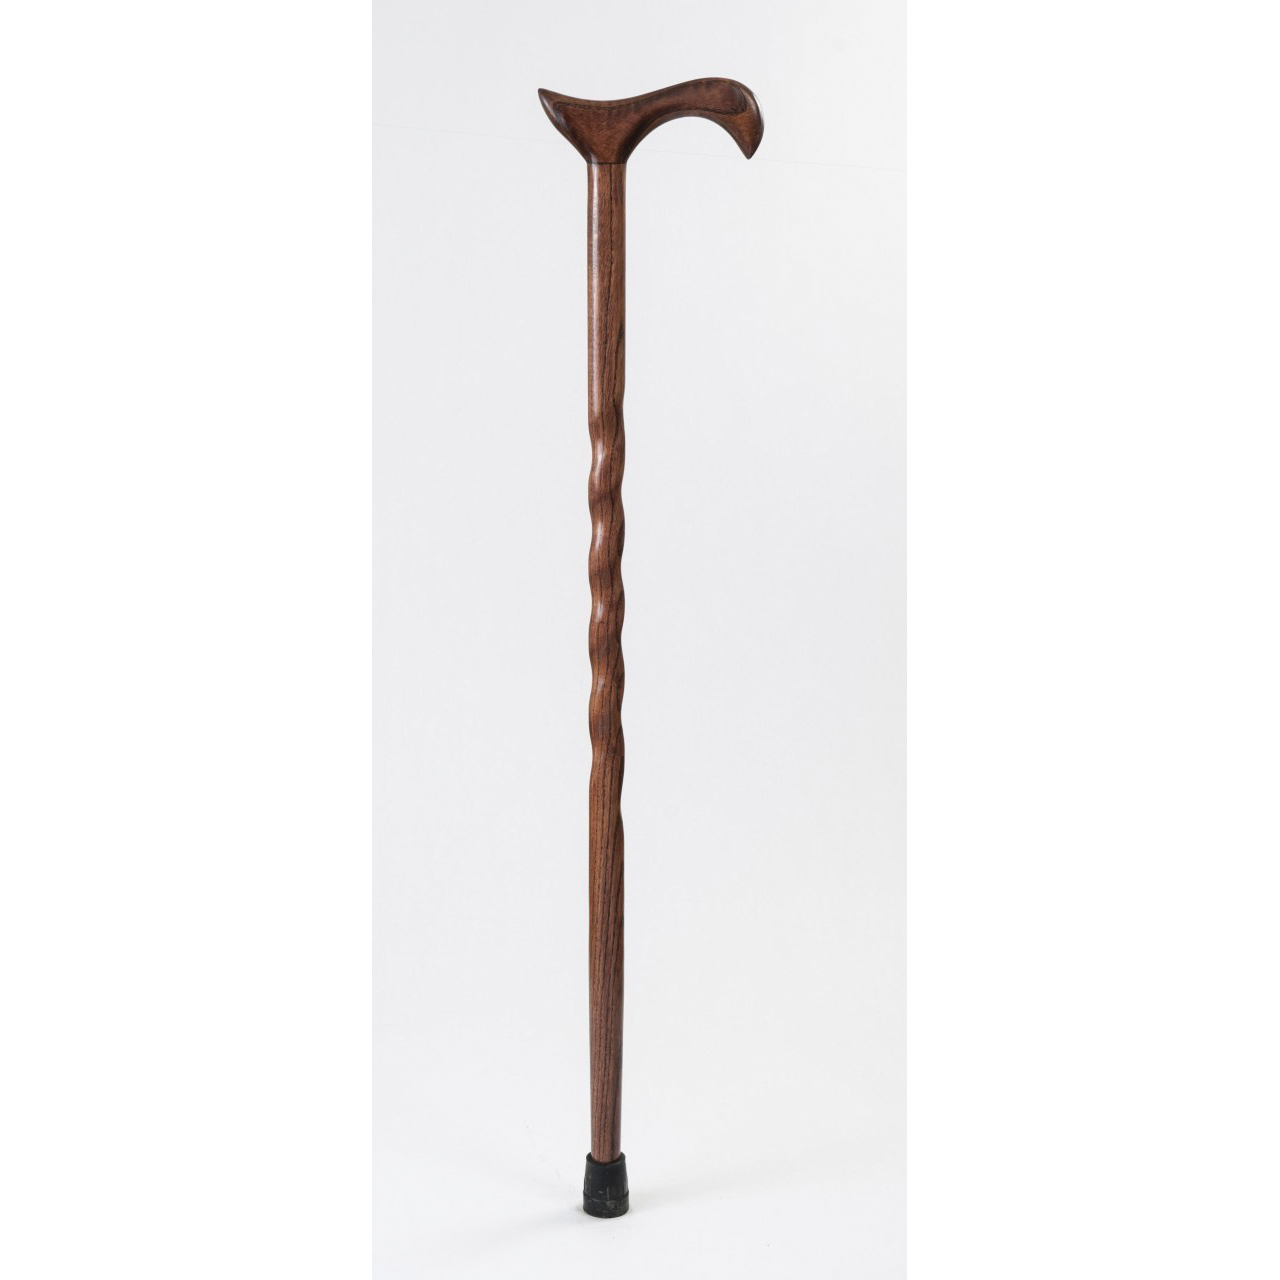 Brazos 502-3000-0051 Twisted Walking Cane, 34 in H Cane, Derby Handle, Wood Handle, Oak Wood, Red - 1